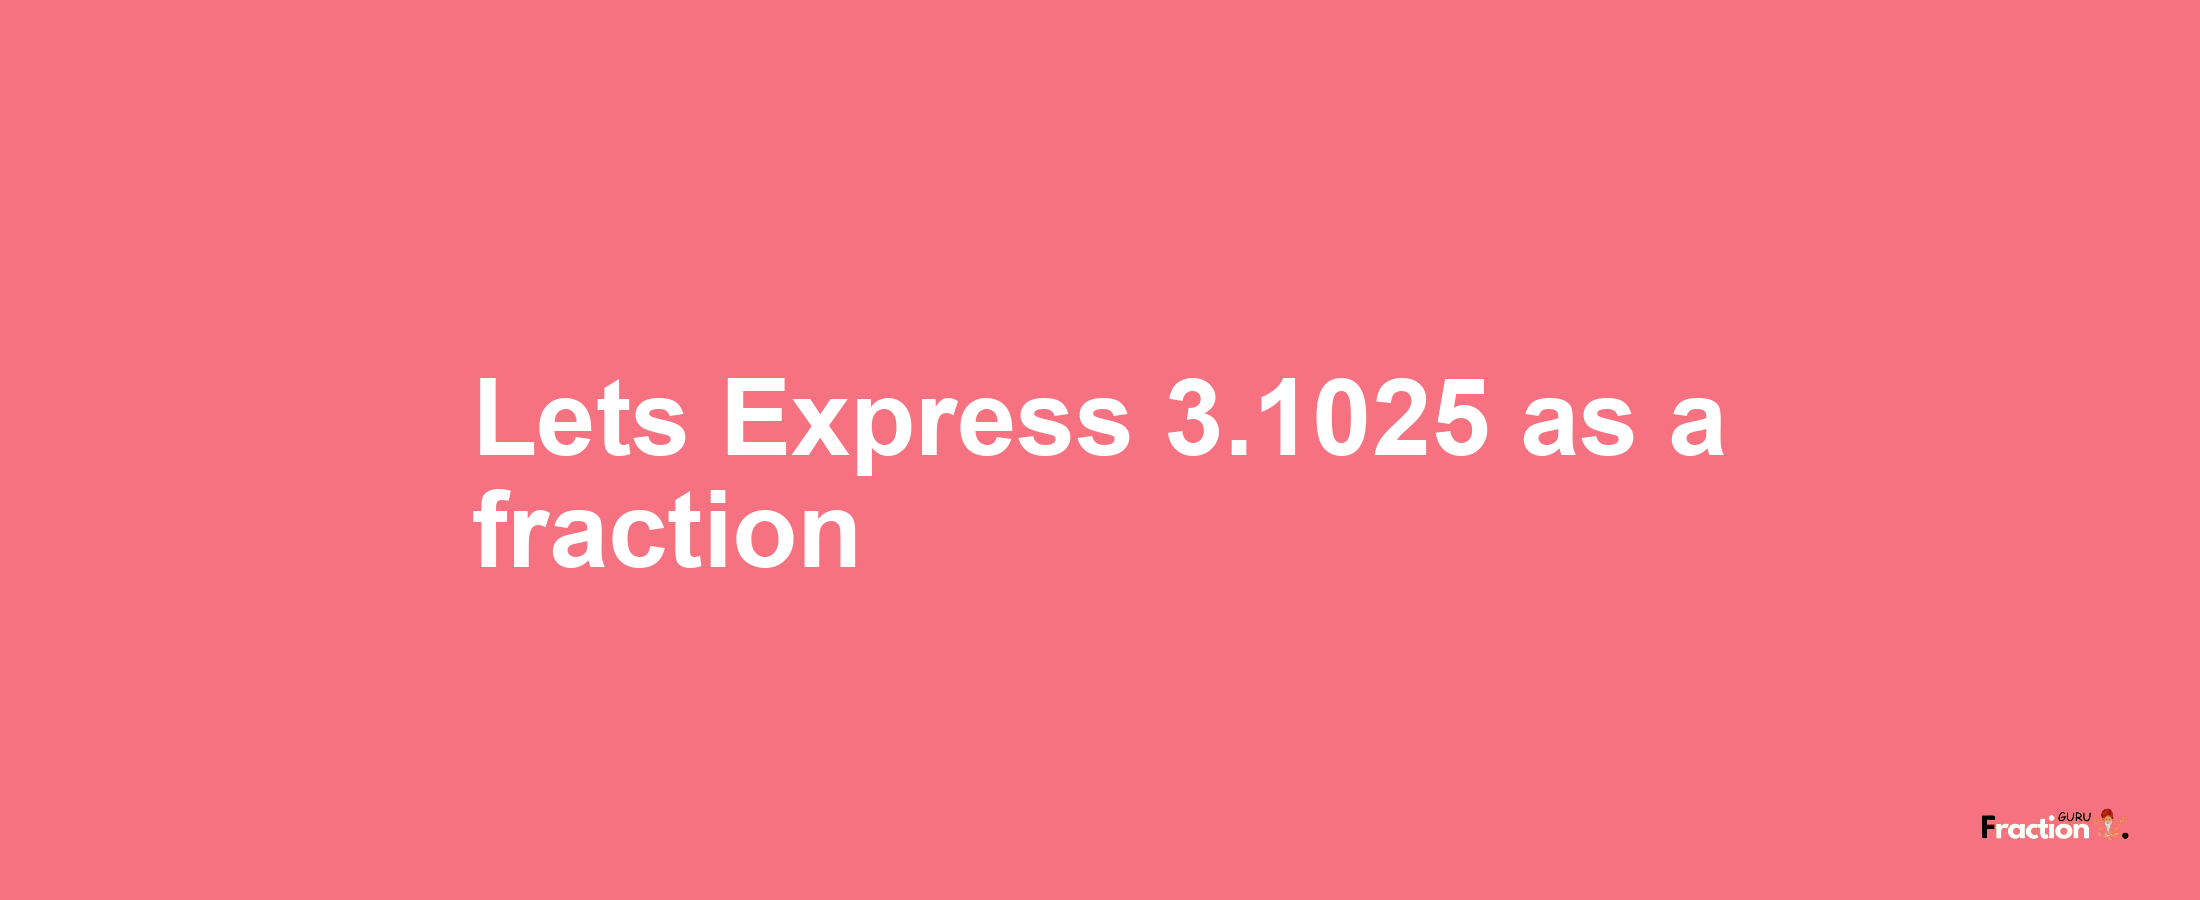 Lets Express 3.1025 as afraction